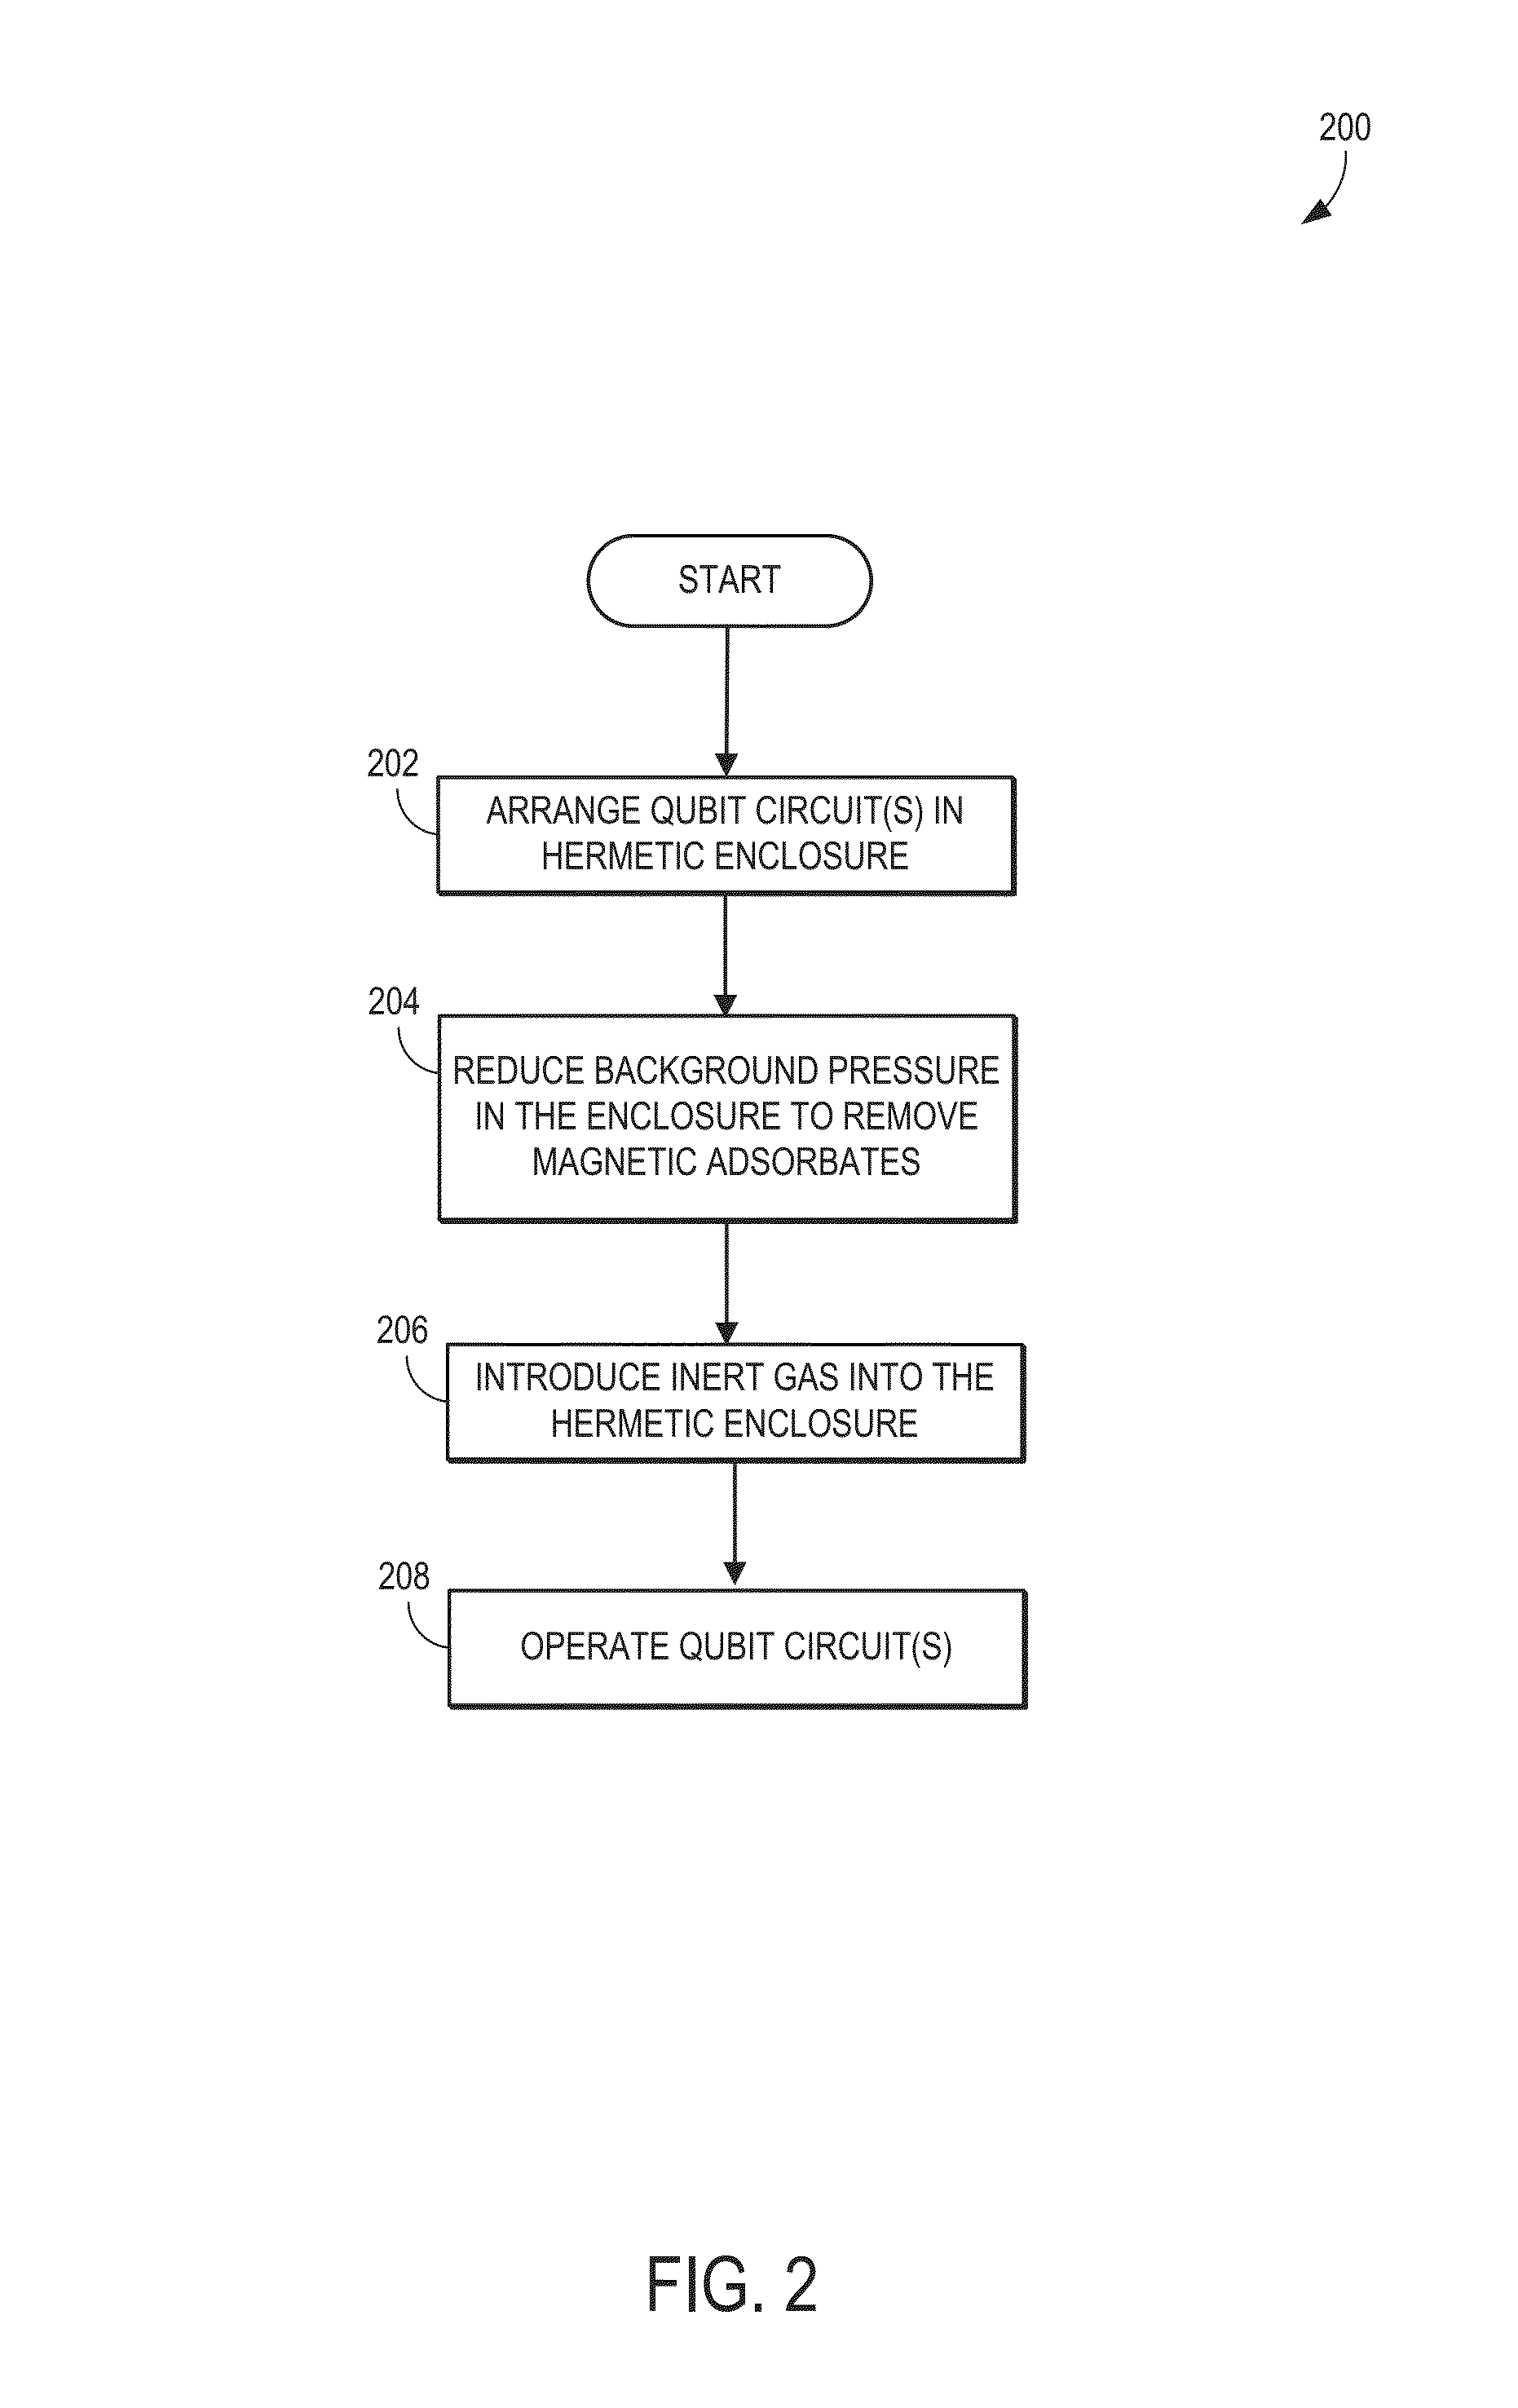 Systems and Methods for Suppressing Magnetically Active Surface Defects in Superconducting Circuits